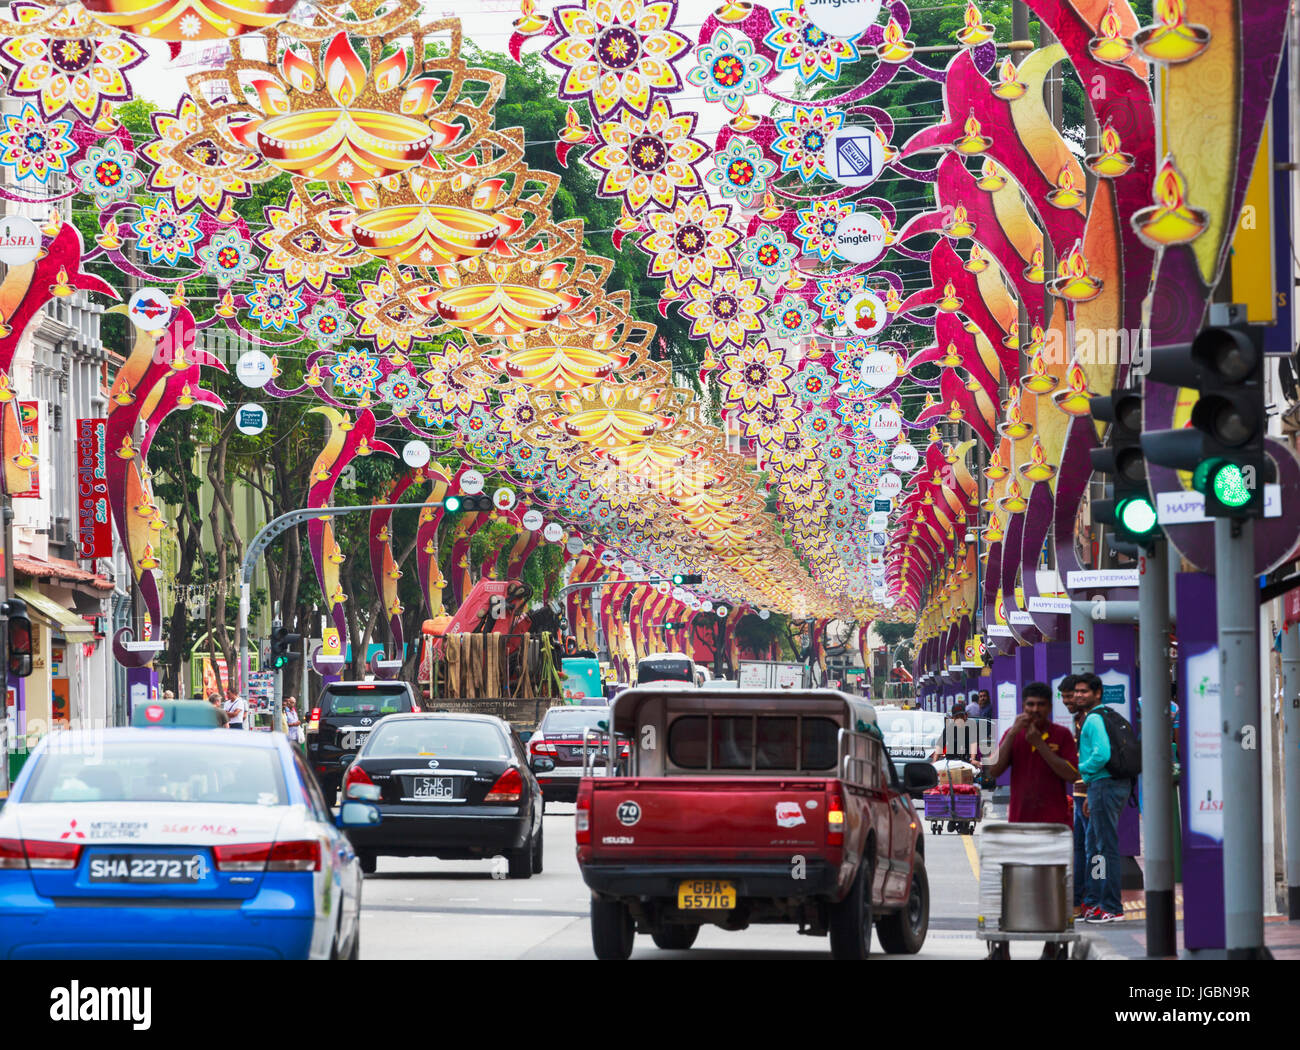 Republic of Singapore.  Serangoon Road, the main thoroughfare of the area known as Little India. The decorations are for the Deepwali Hindu festival. Stock Photo